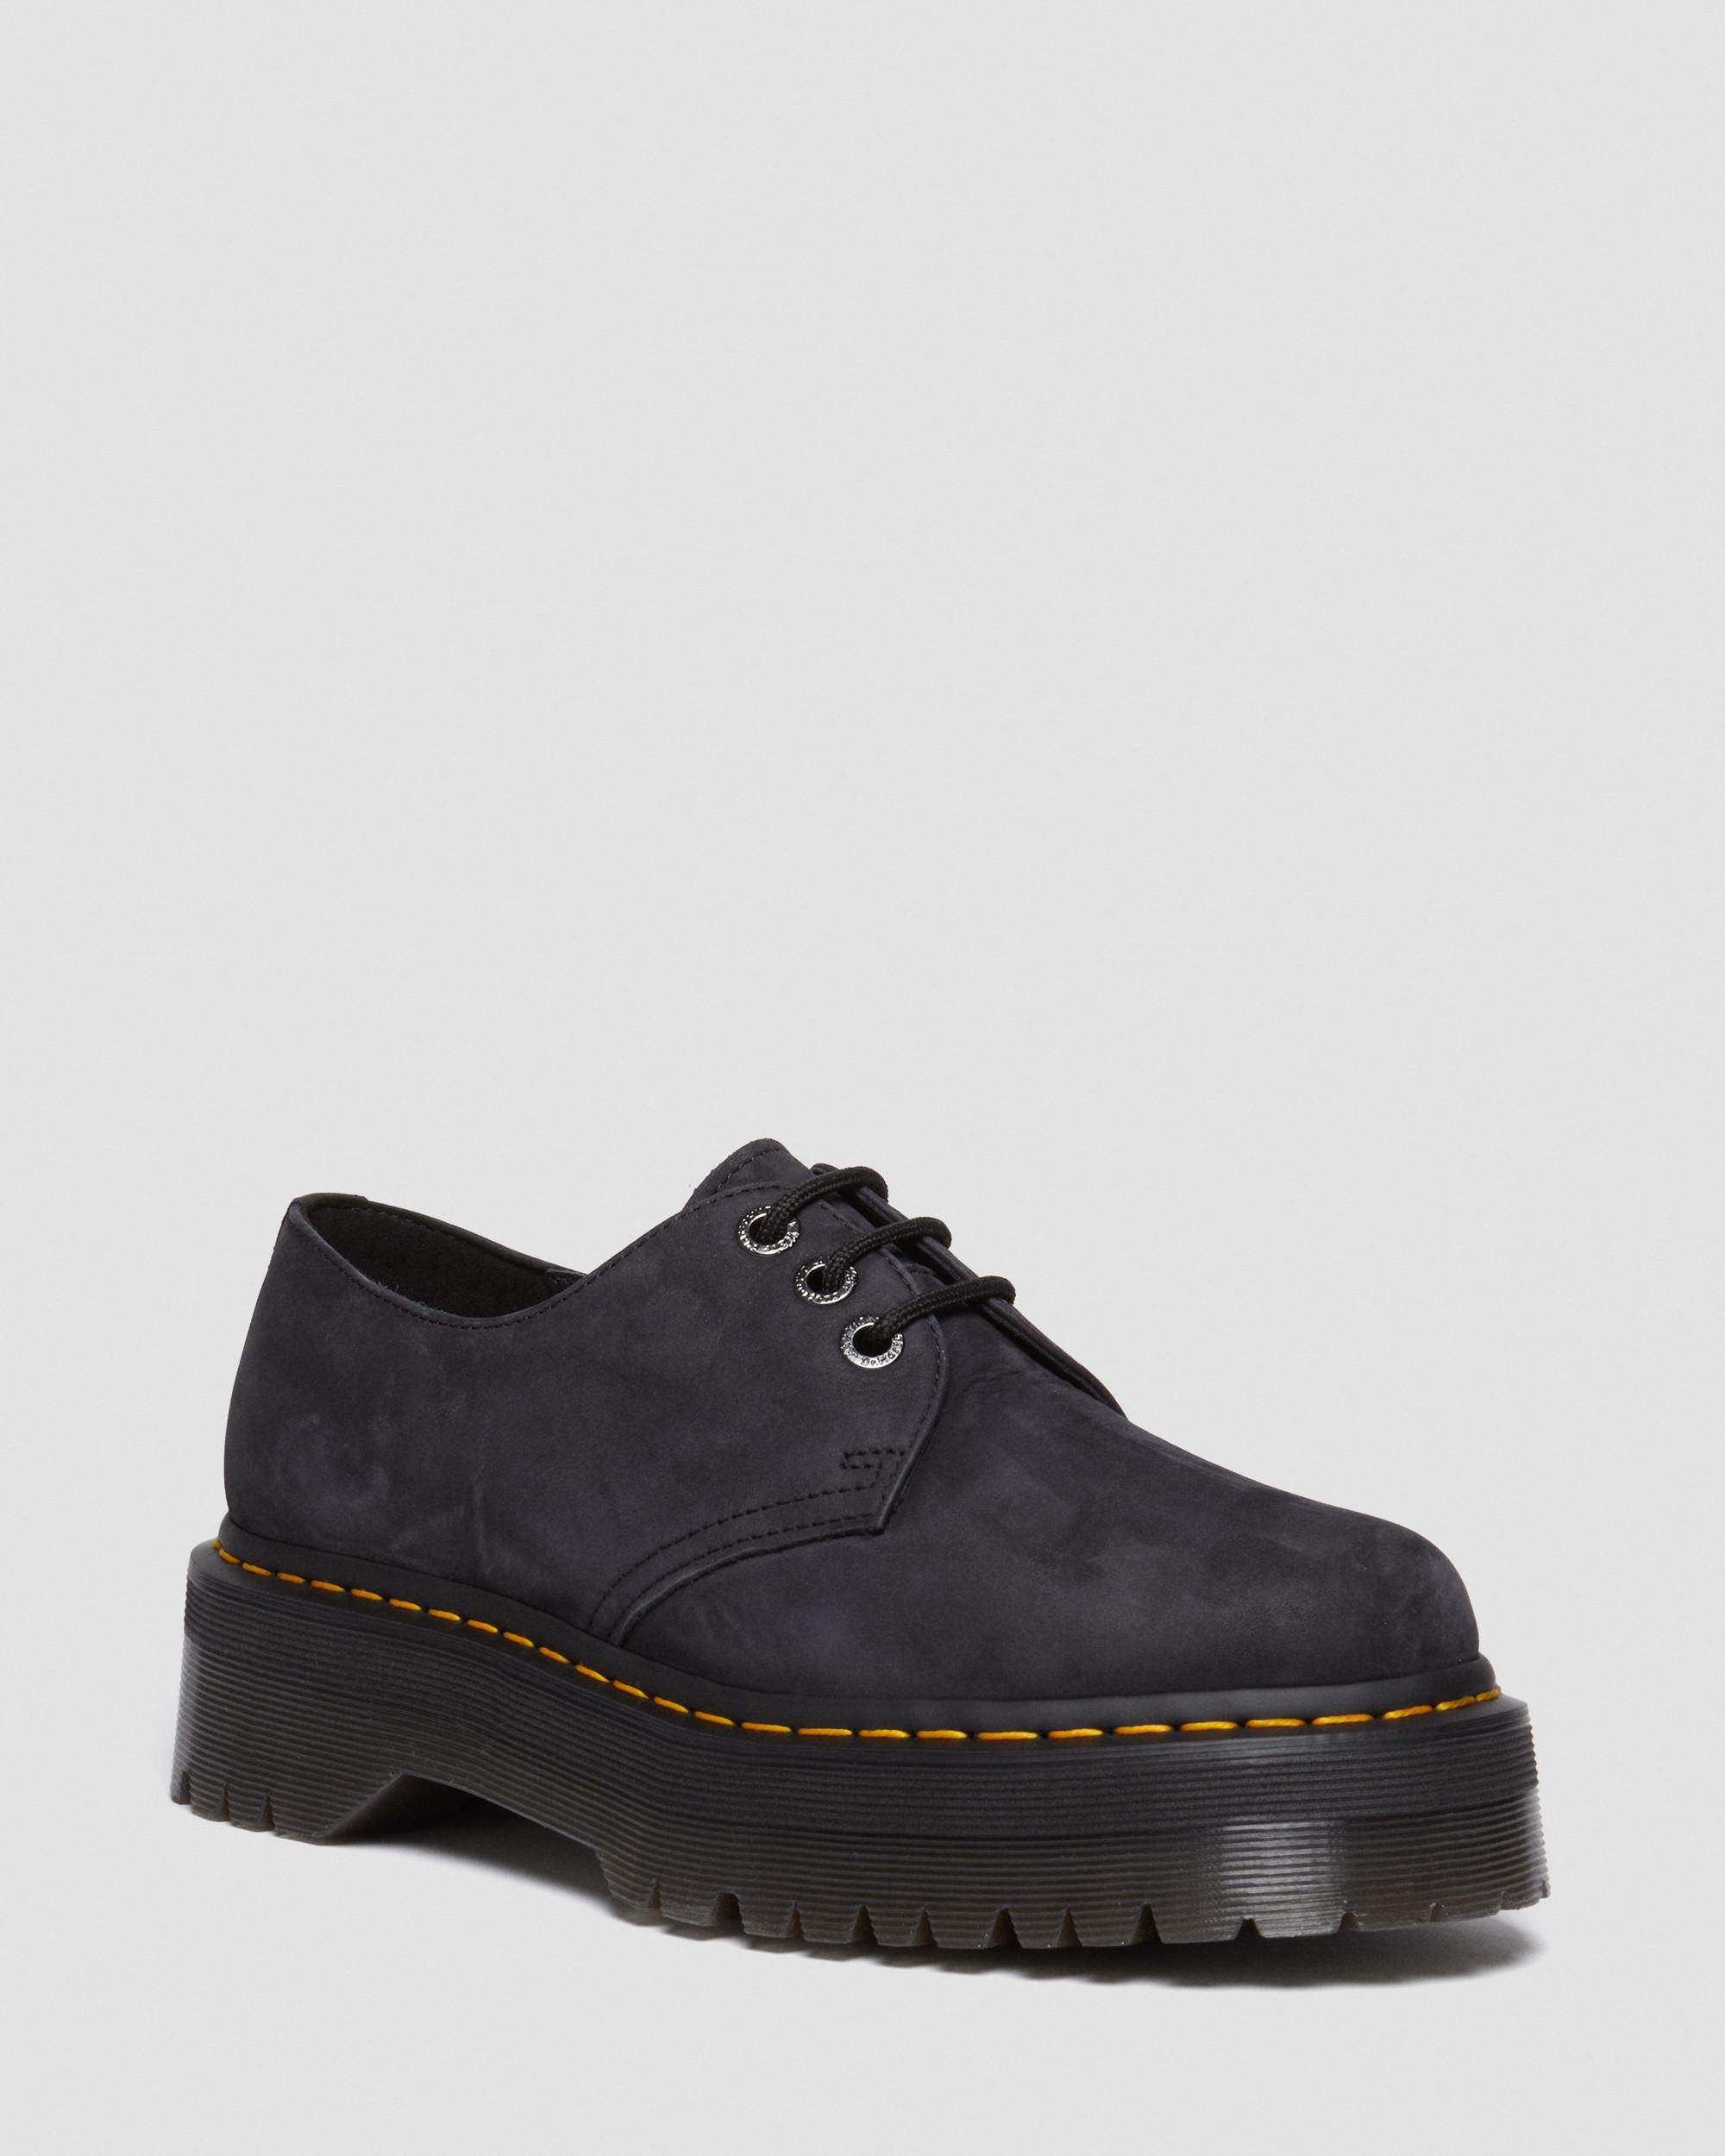 1461 II Tumbled Nubuck Leather Platform Casual Shoes in Charcoal Grey | Dr.  Martens